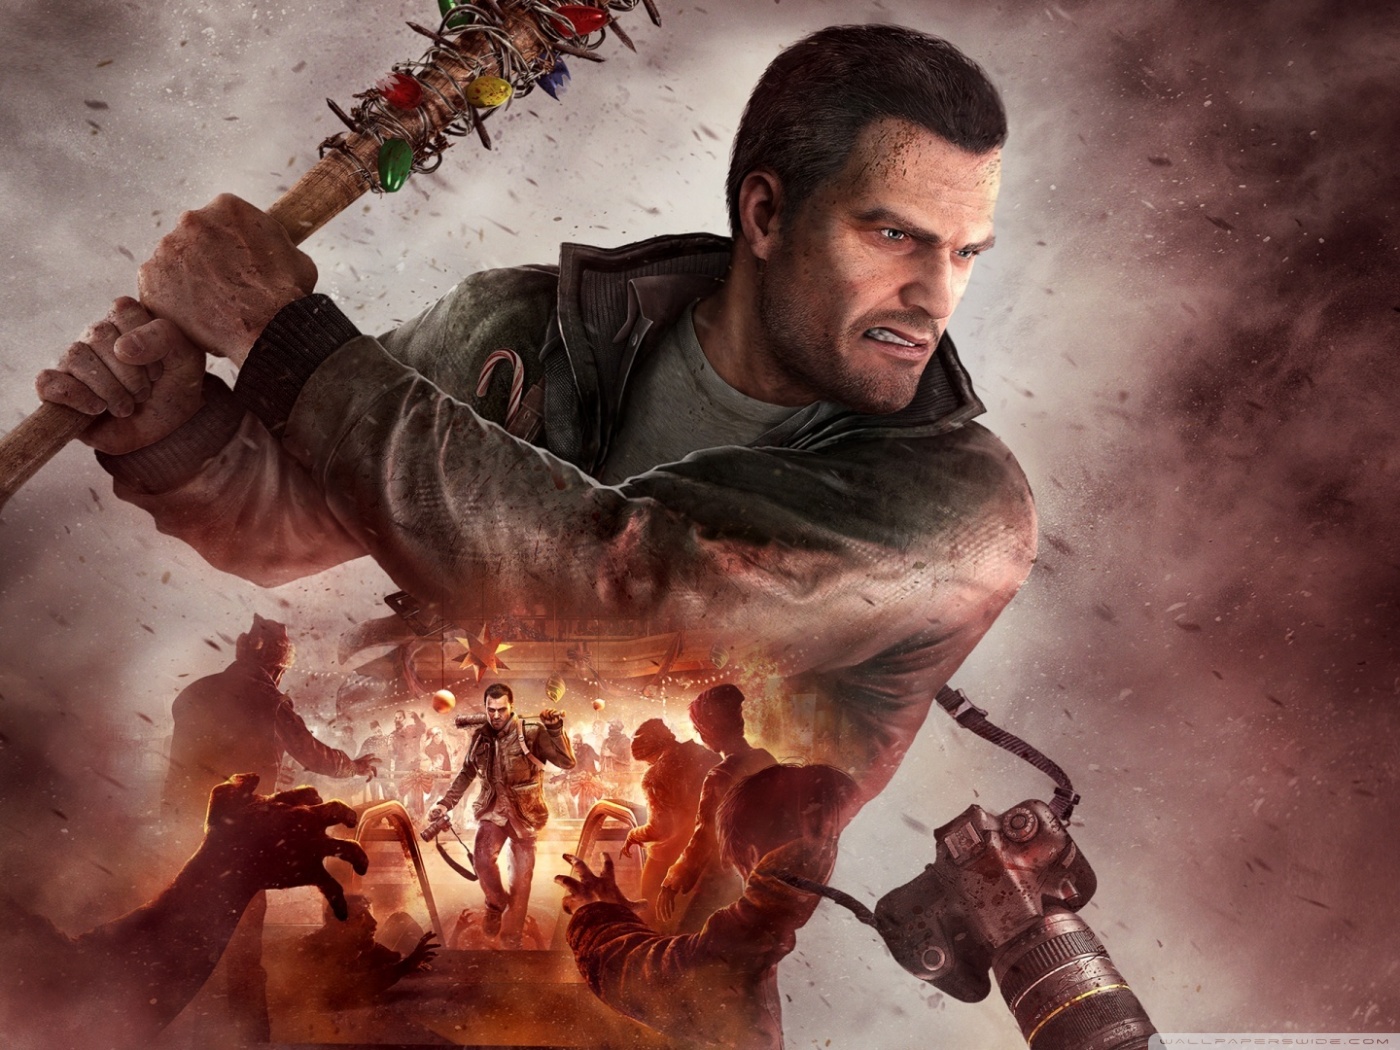 Dead Rising 3 Wallpapers